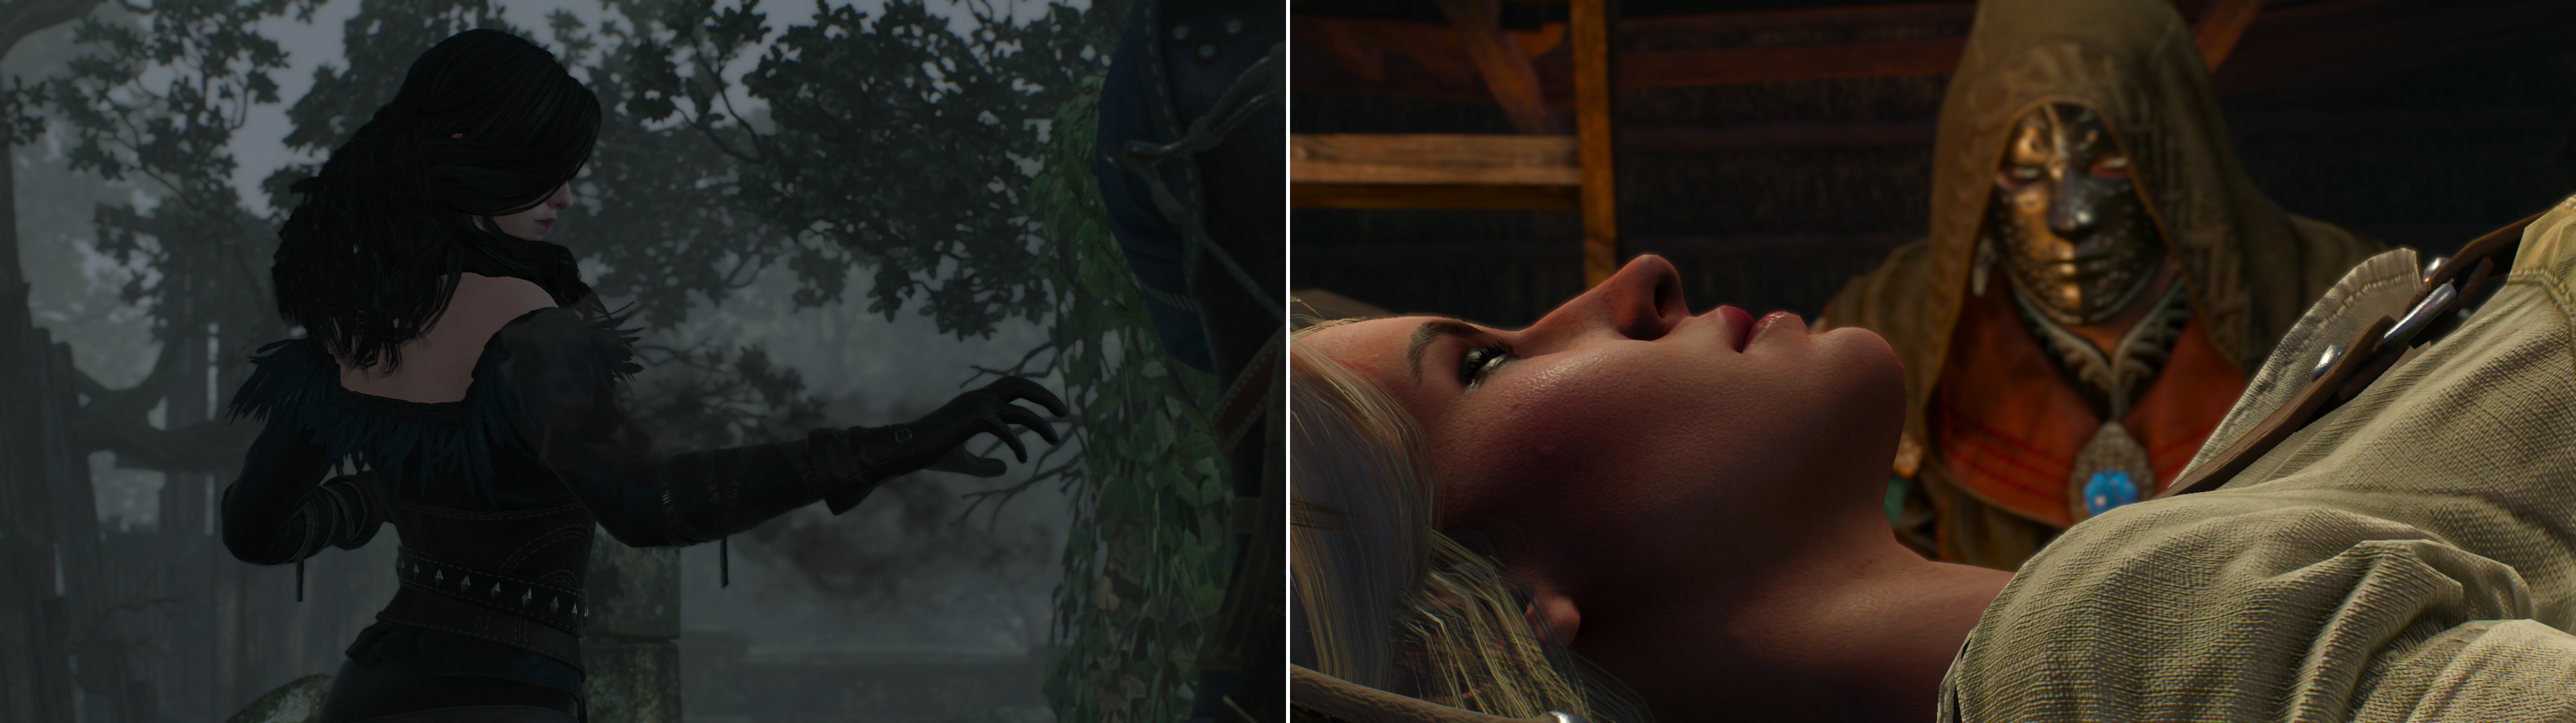 Yennefer will perform dark magic (left) to coax a tale about Ciri's travels in Skellige out of Craven's corpse (right).